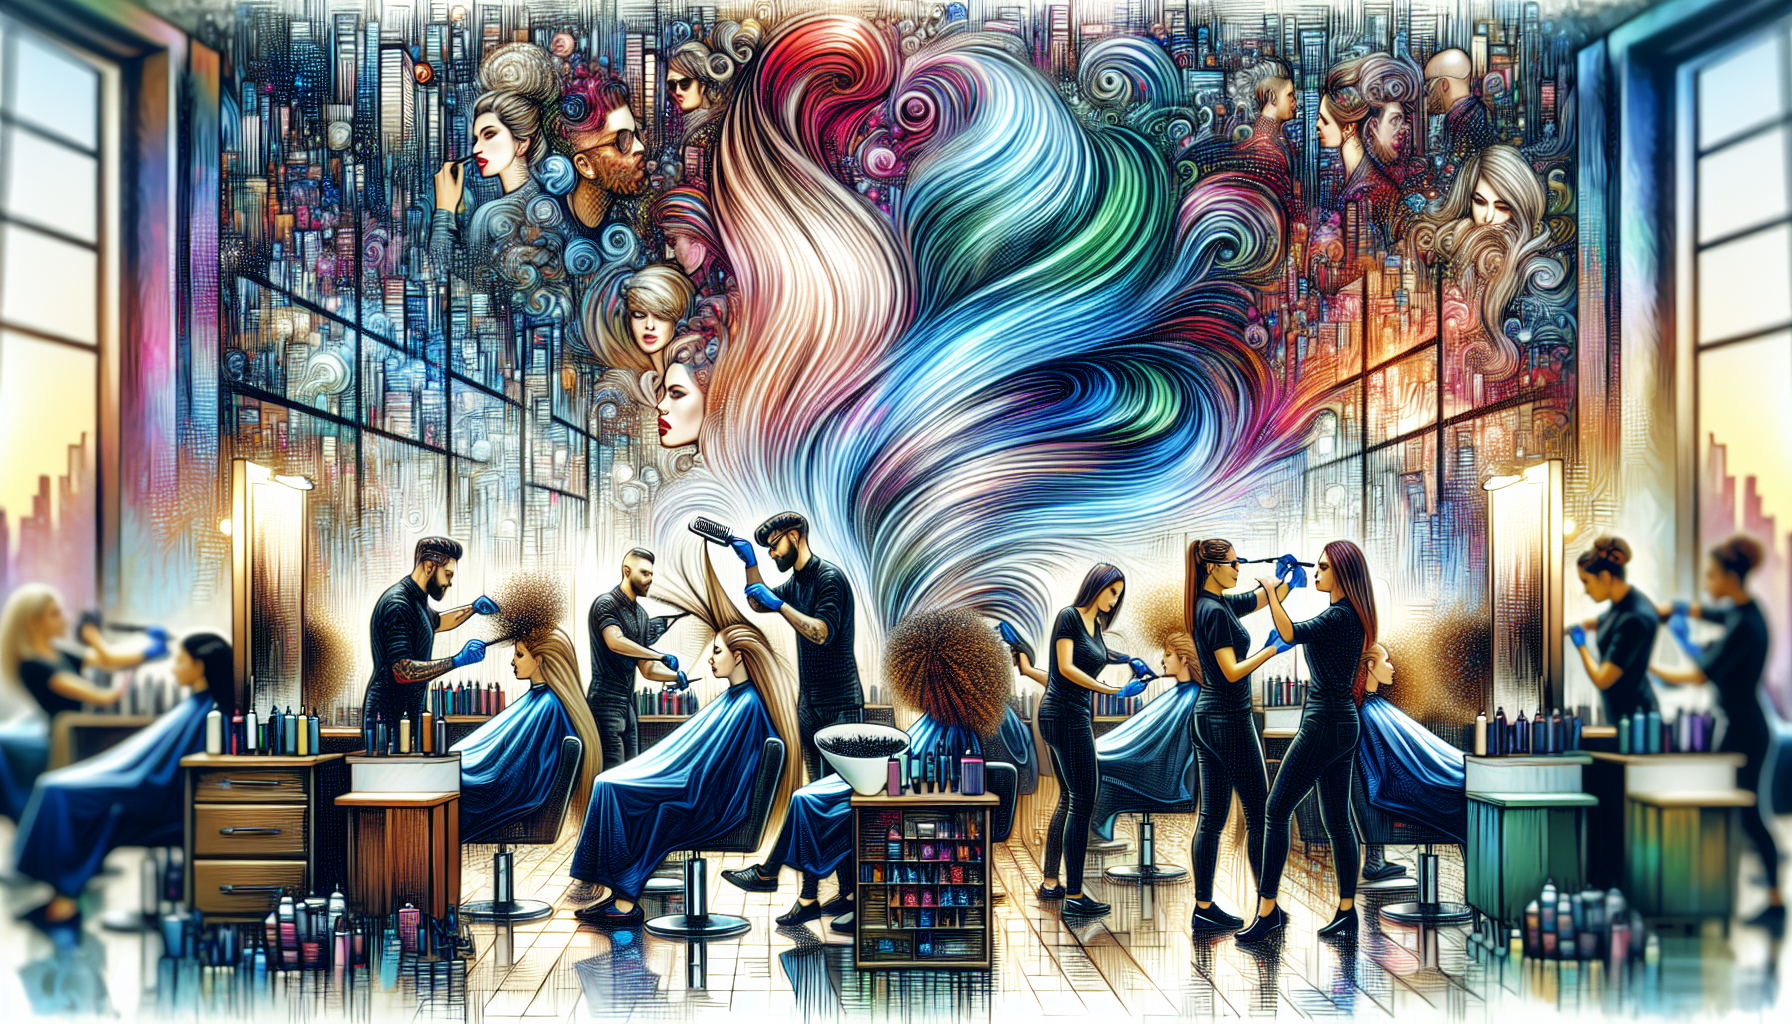 Creative hair design with vibrant colors and modern tools